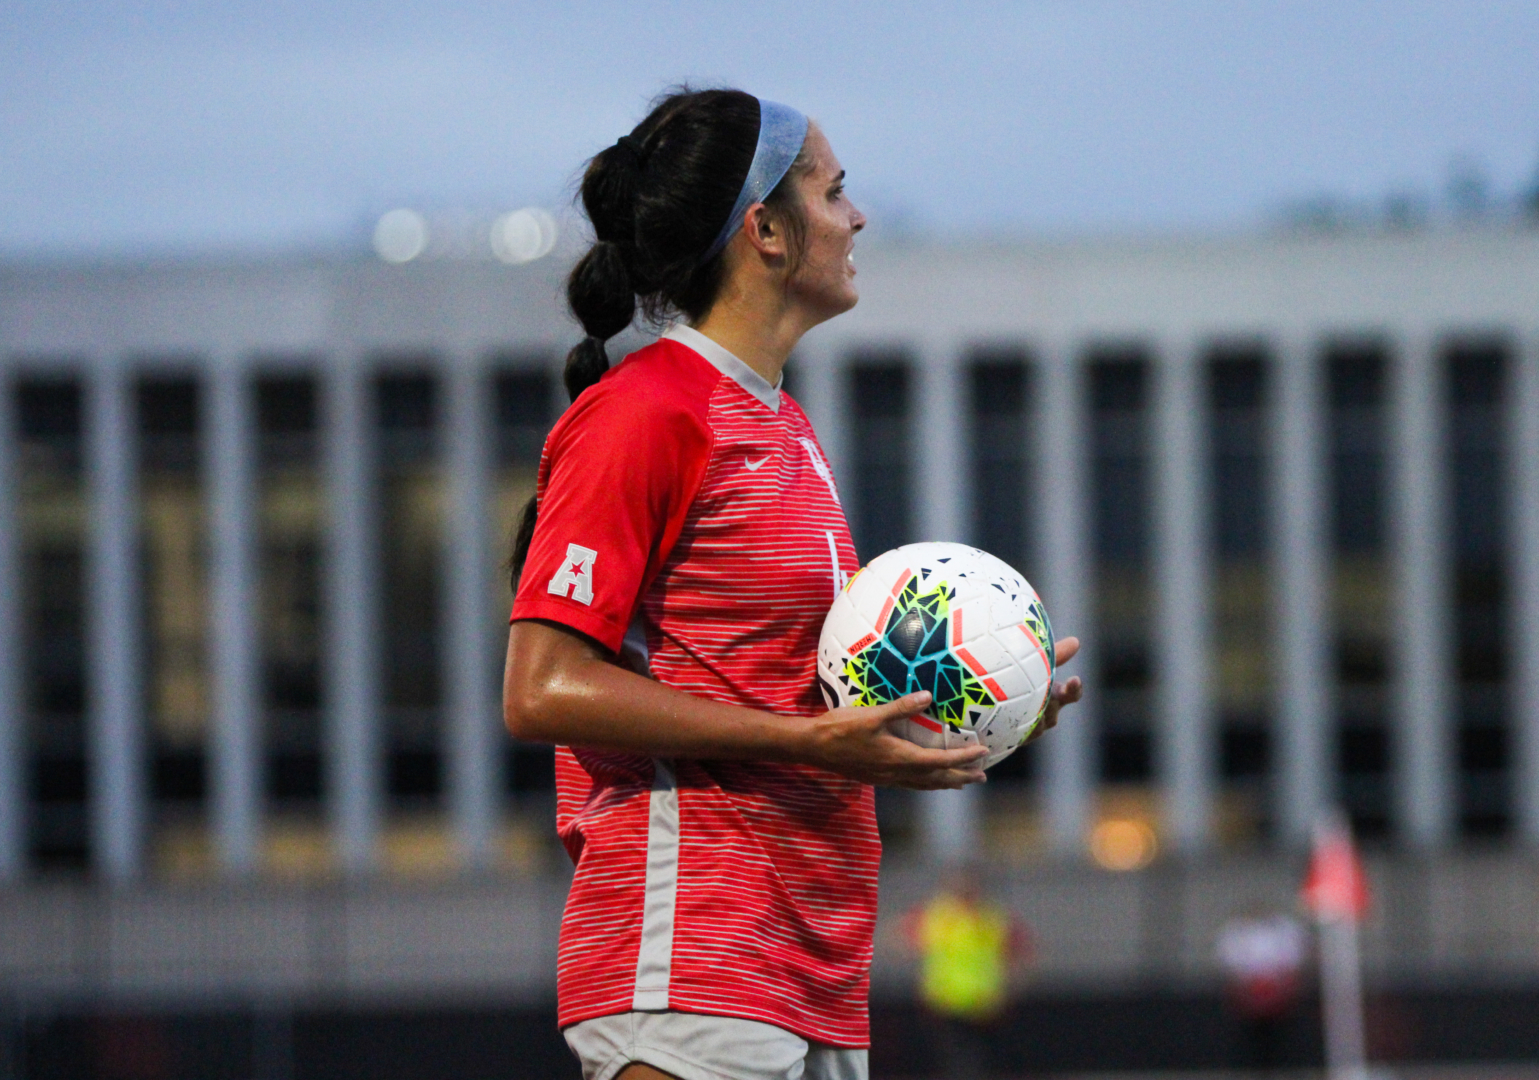 UH soccer couldn't get it done against ECU after suffering an overtime loss after being back home.